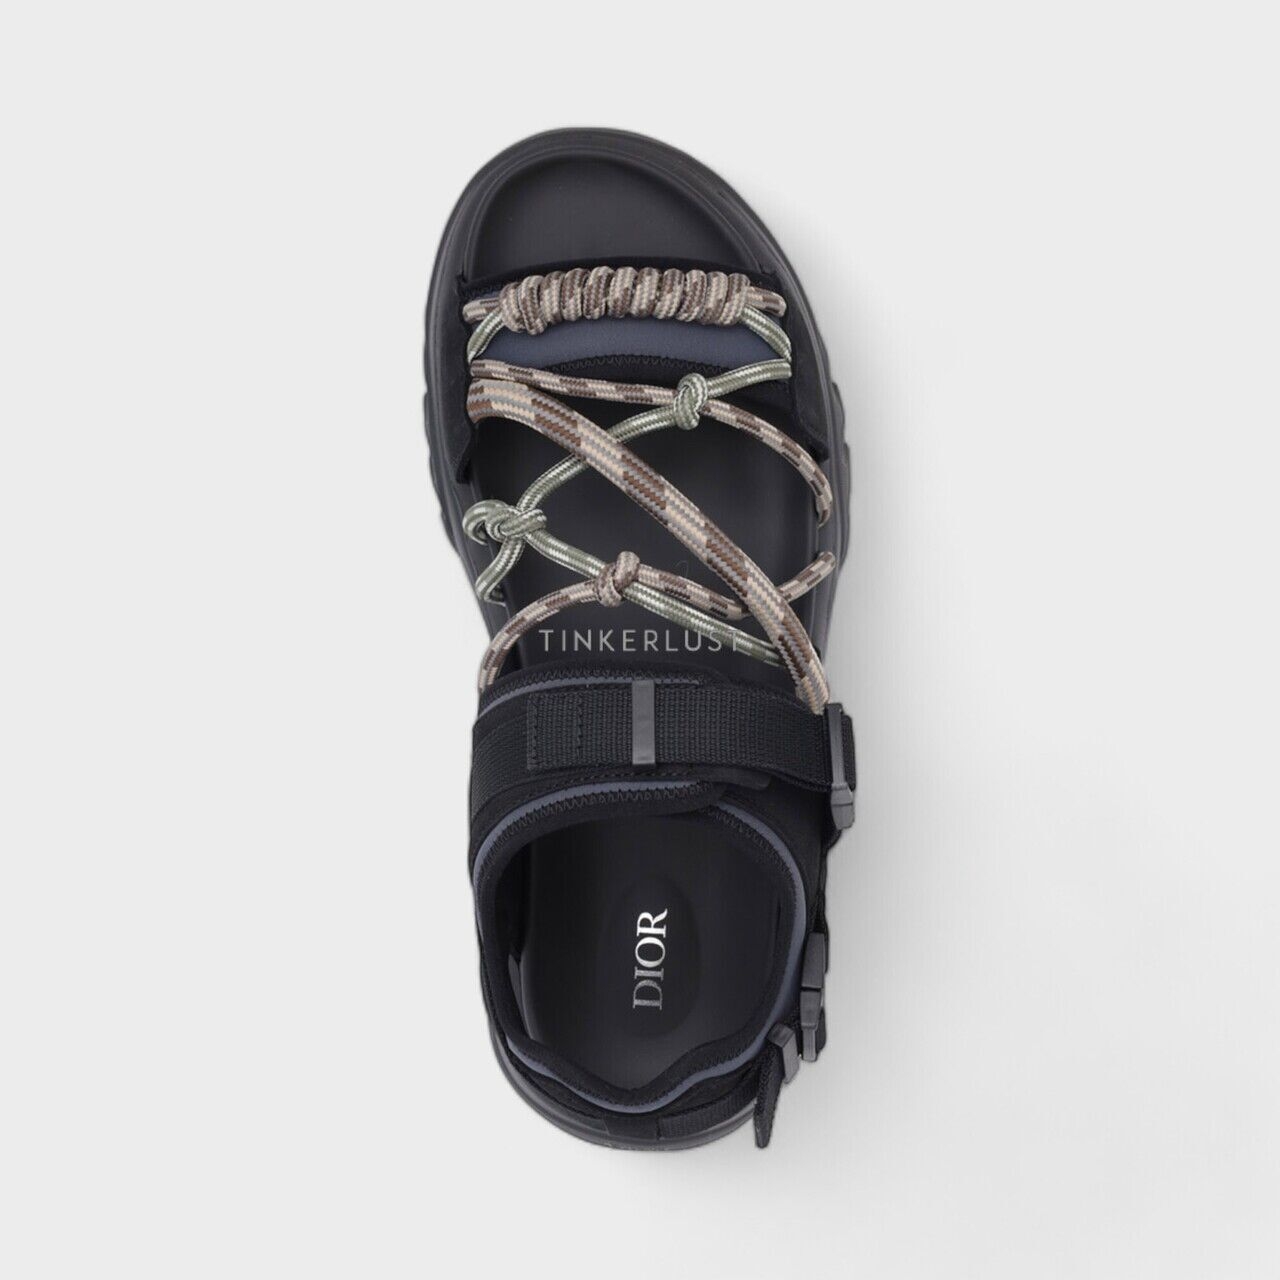 Christian Dior H-Town Sandals in Black/Gray Technical Fabric with Brown Nubuck Calfskin